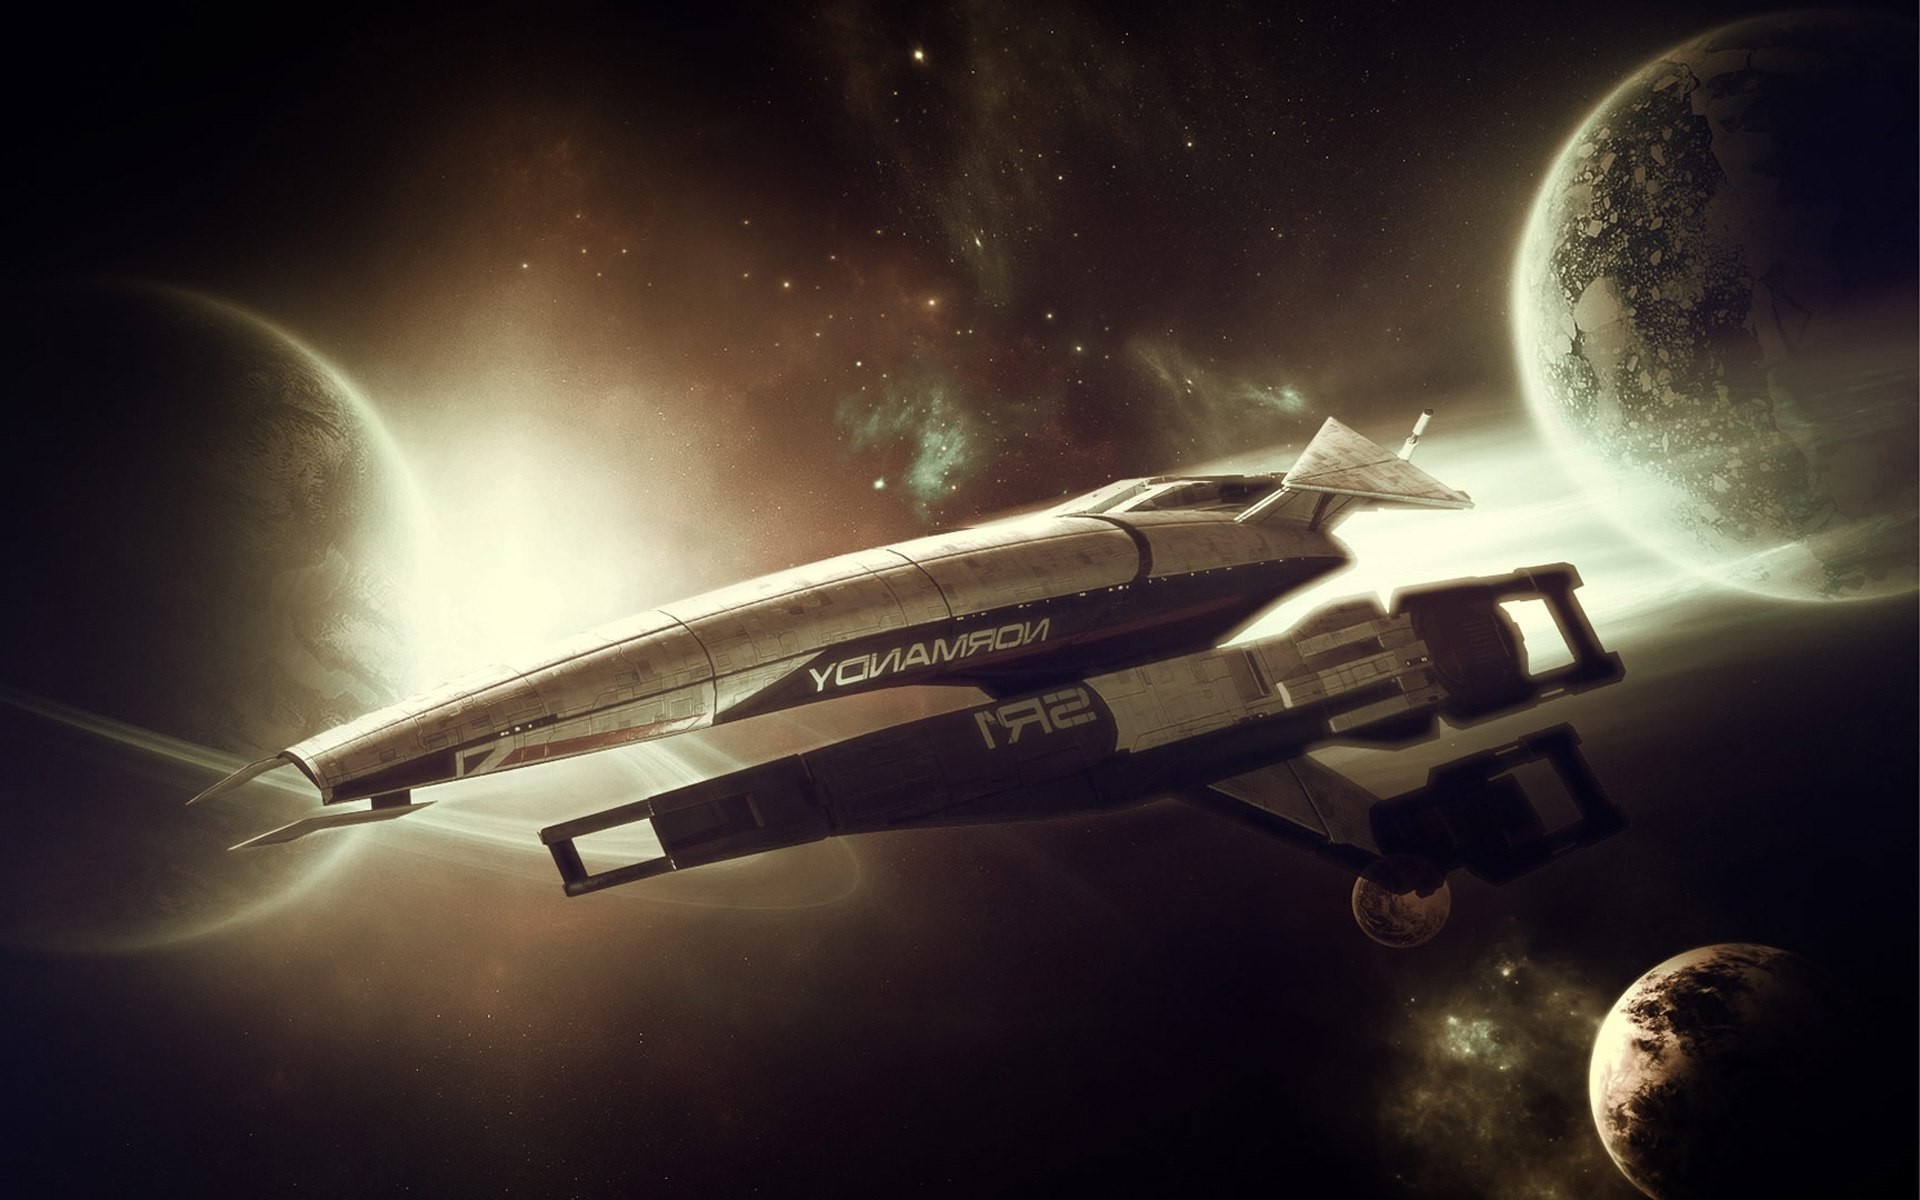 Mass Effect Space Wallpaper 74 Images